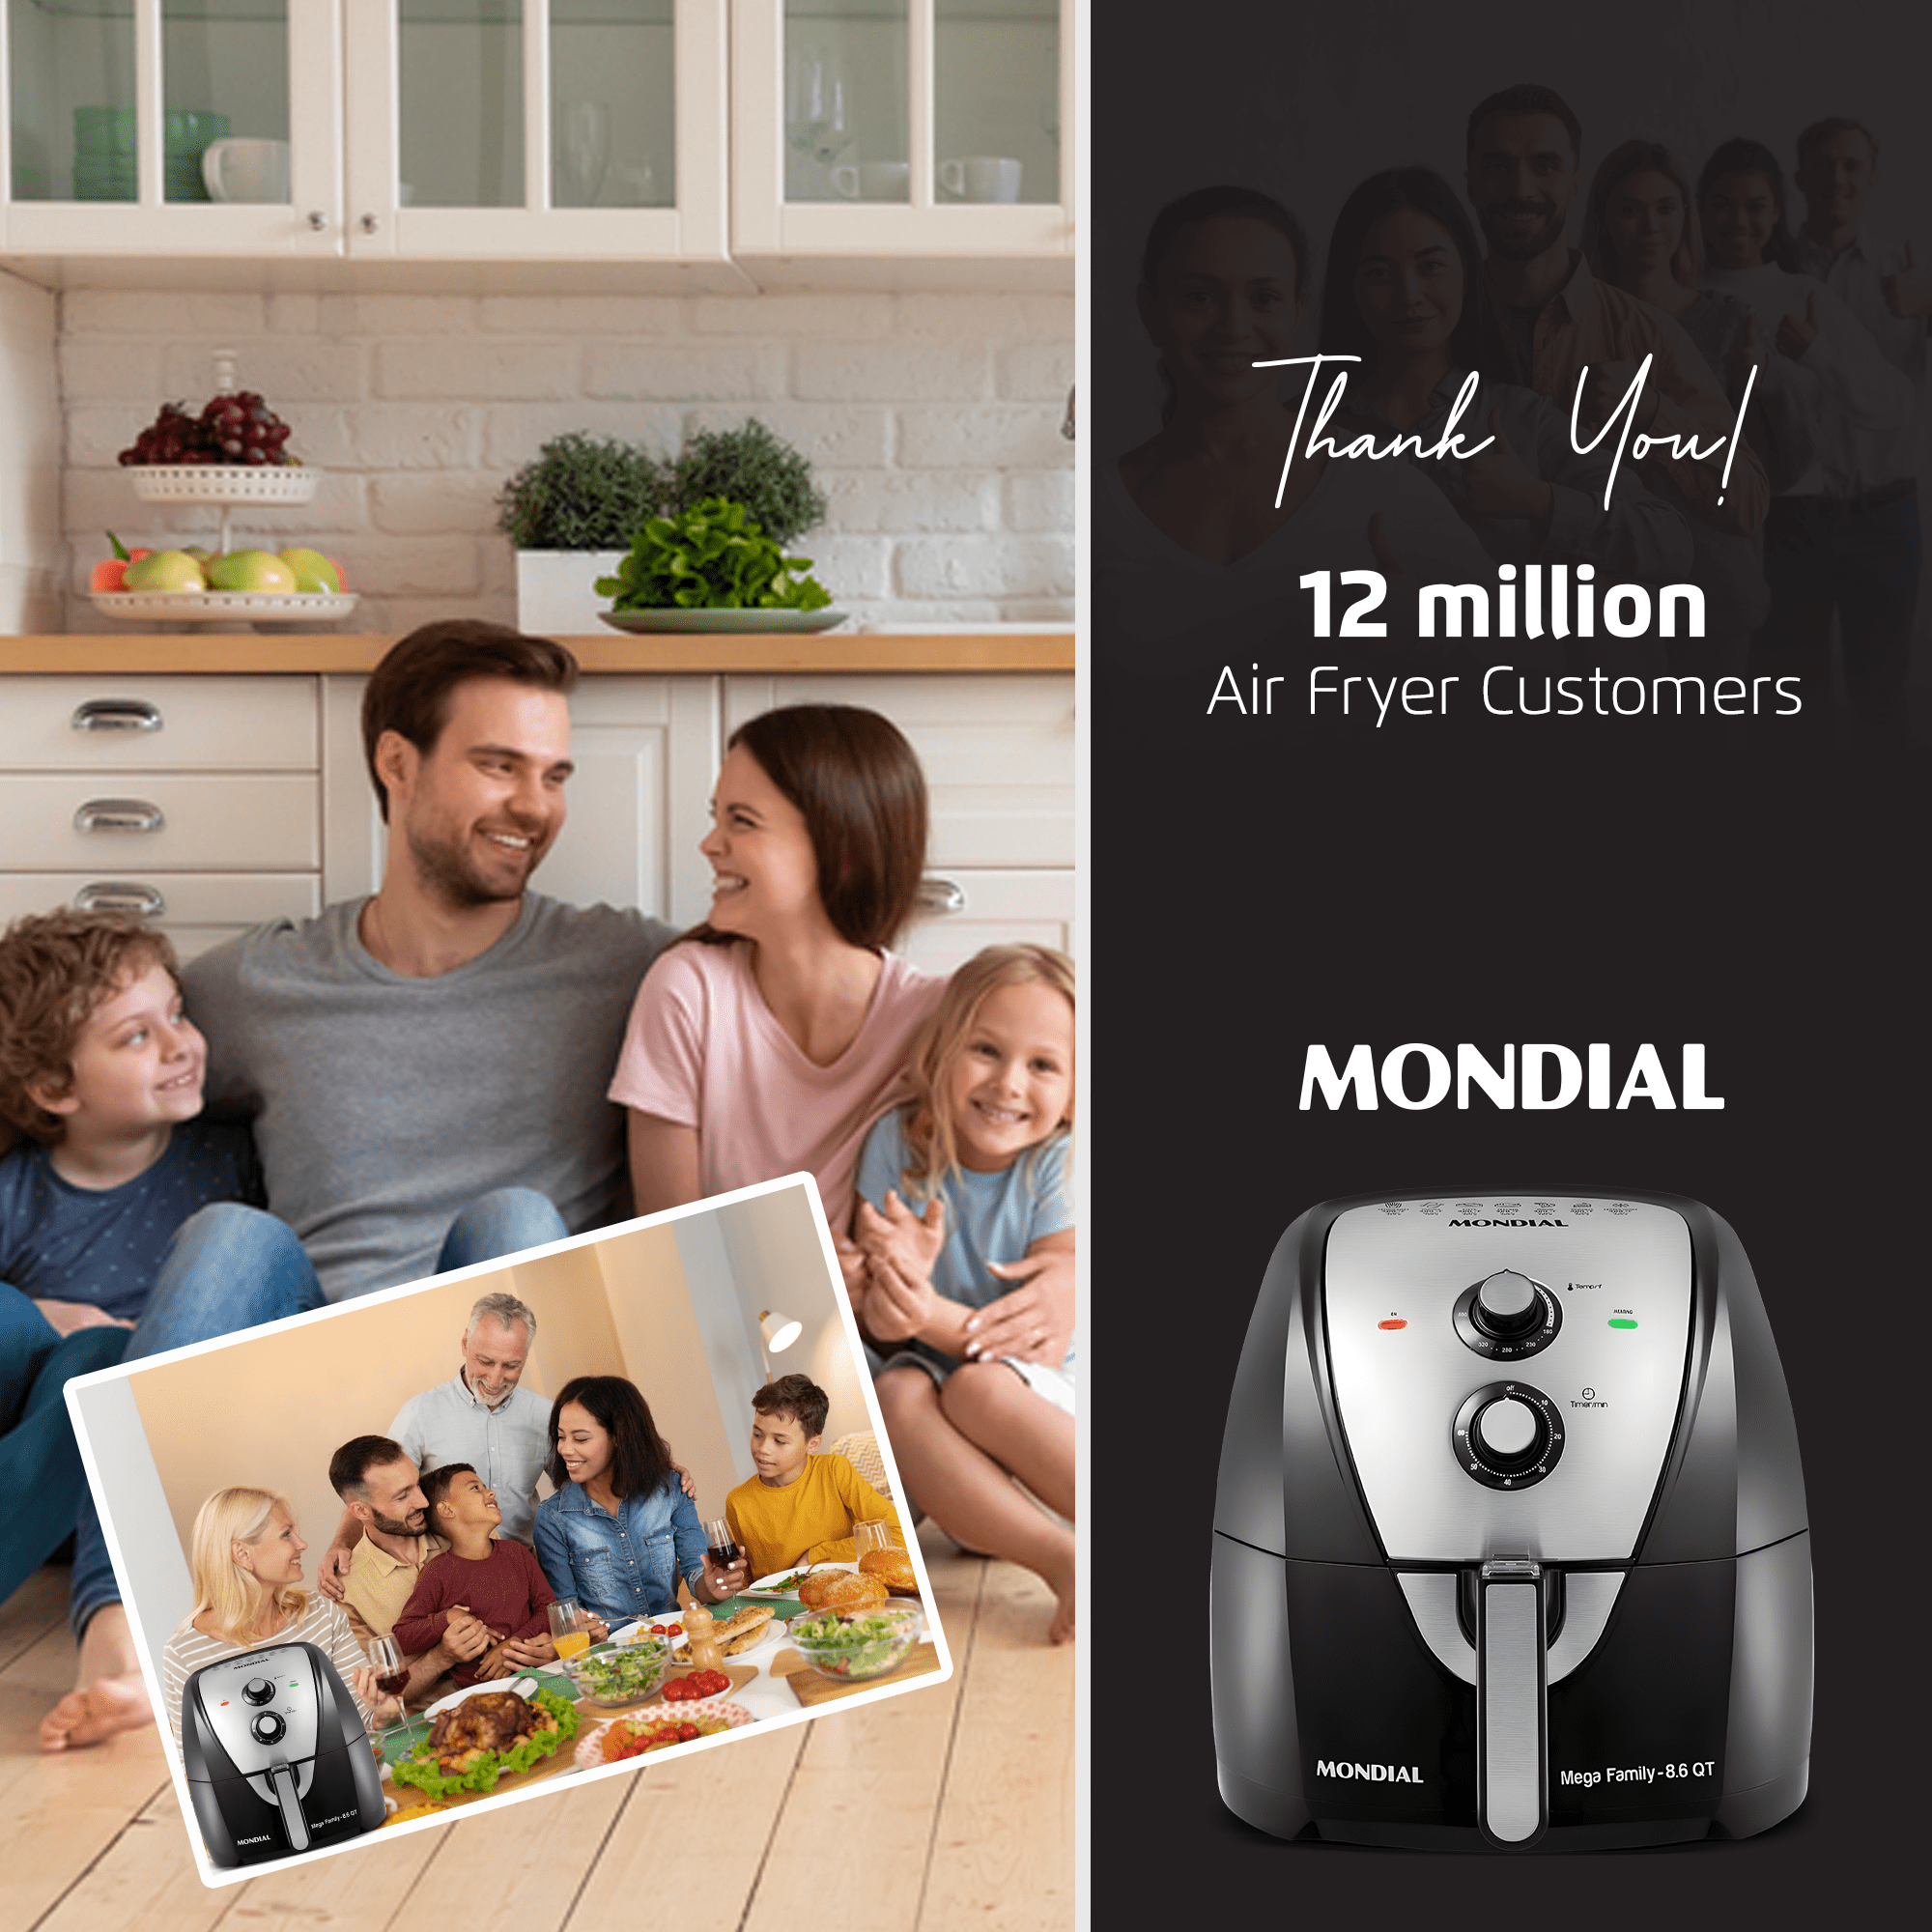 Mondial Air Fryer, Non-Toxic Large Air Fryer-Easy Set Up - Advance Fast Heat Circulation, 85% Less Fat- Removable & Squared Basket-1800 Watts, 8.6